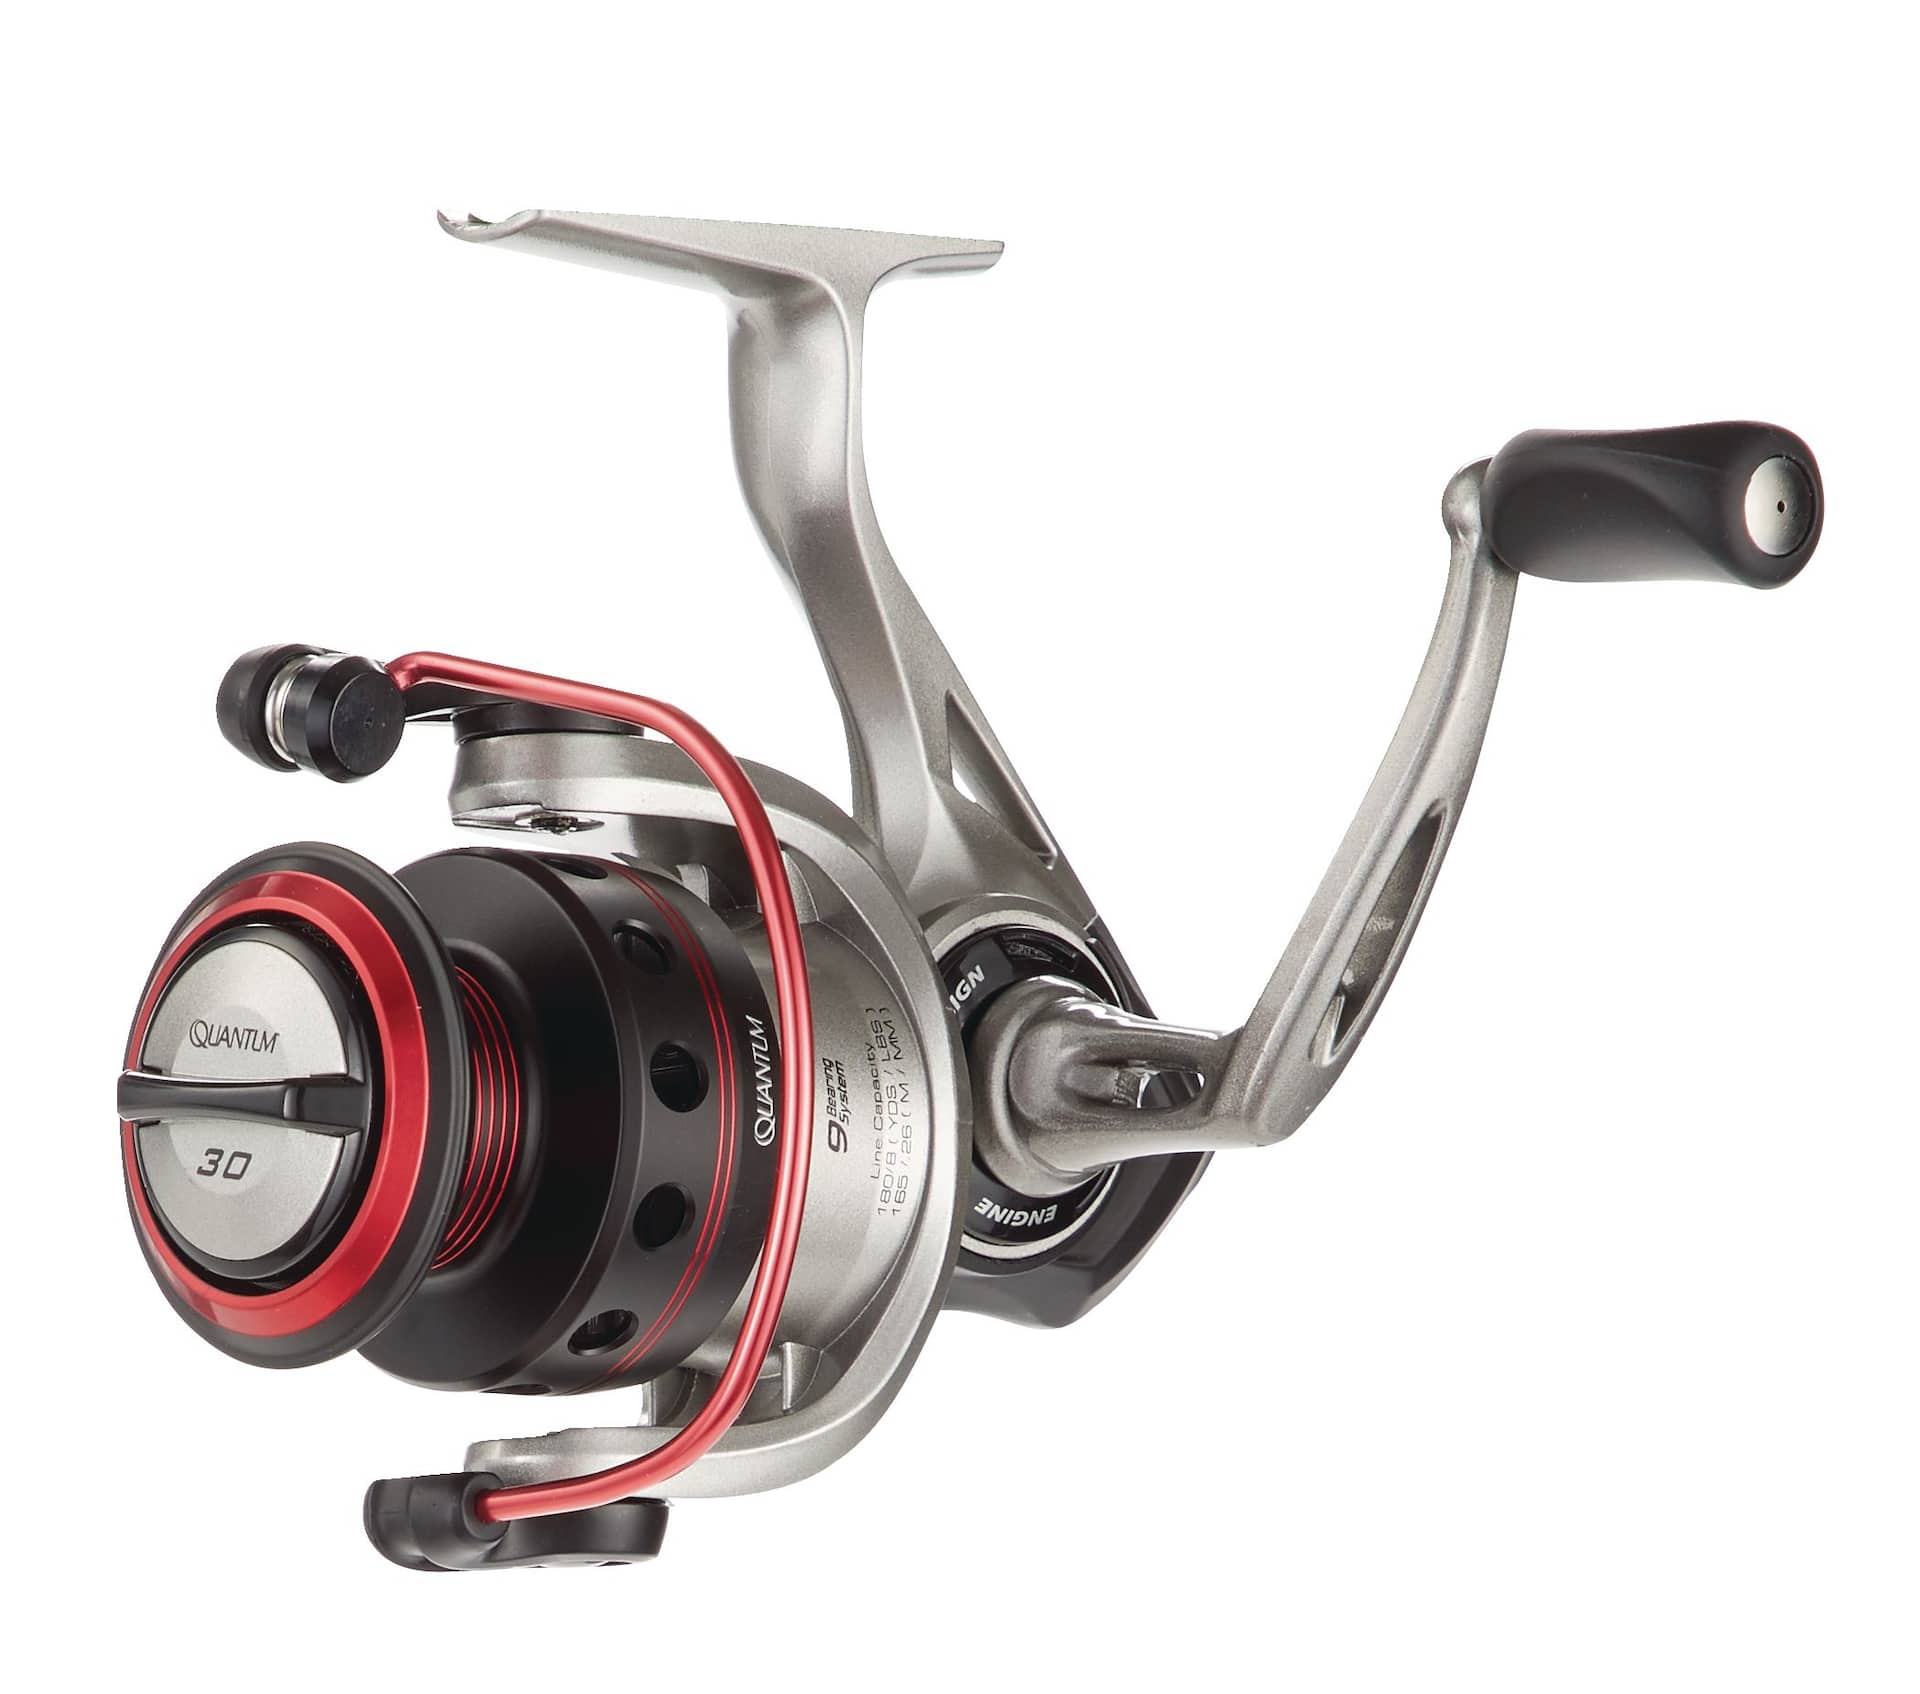 Quantum Pulse Baitcast Reel, Continuous Anti-Reverse Fishing Reel with  Smooth, Precisely-Aligned Gears